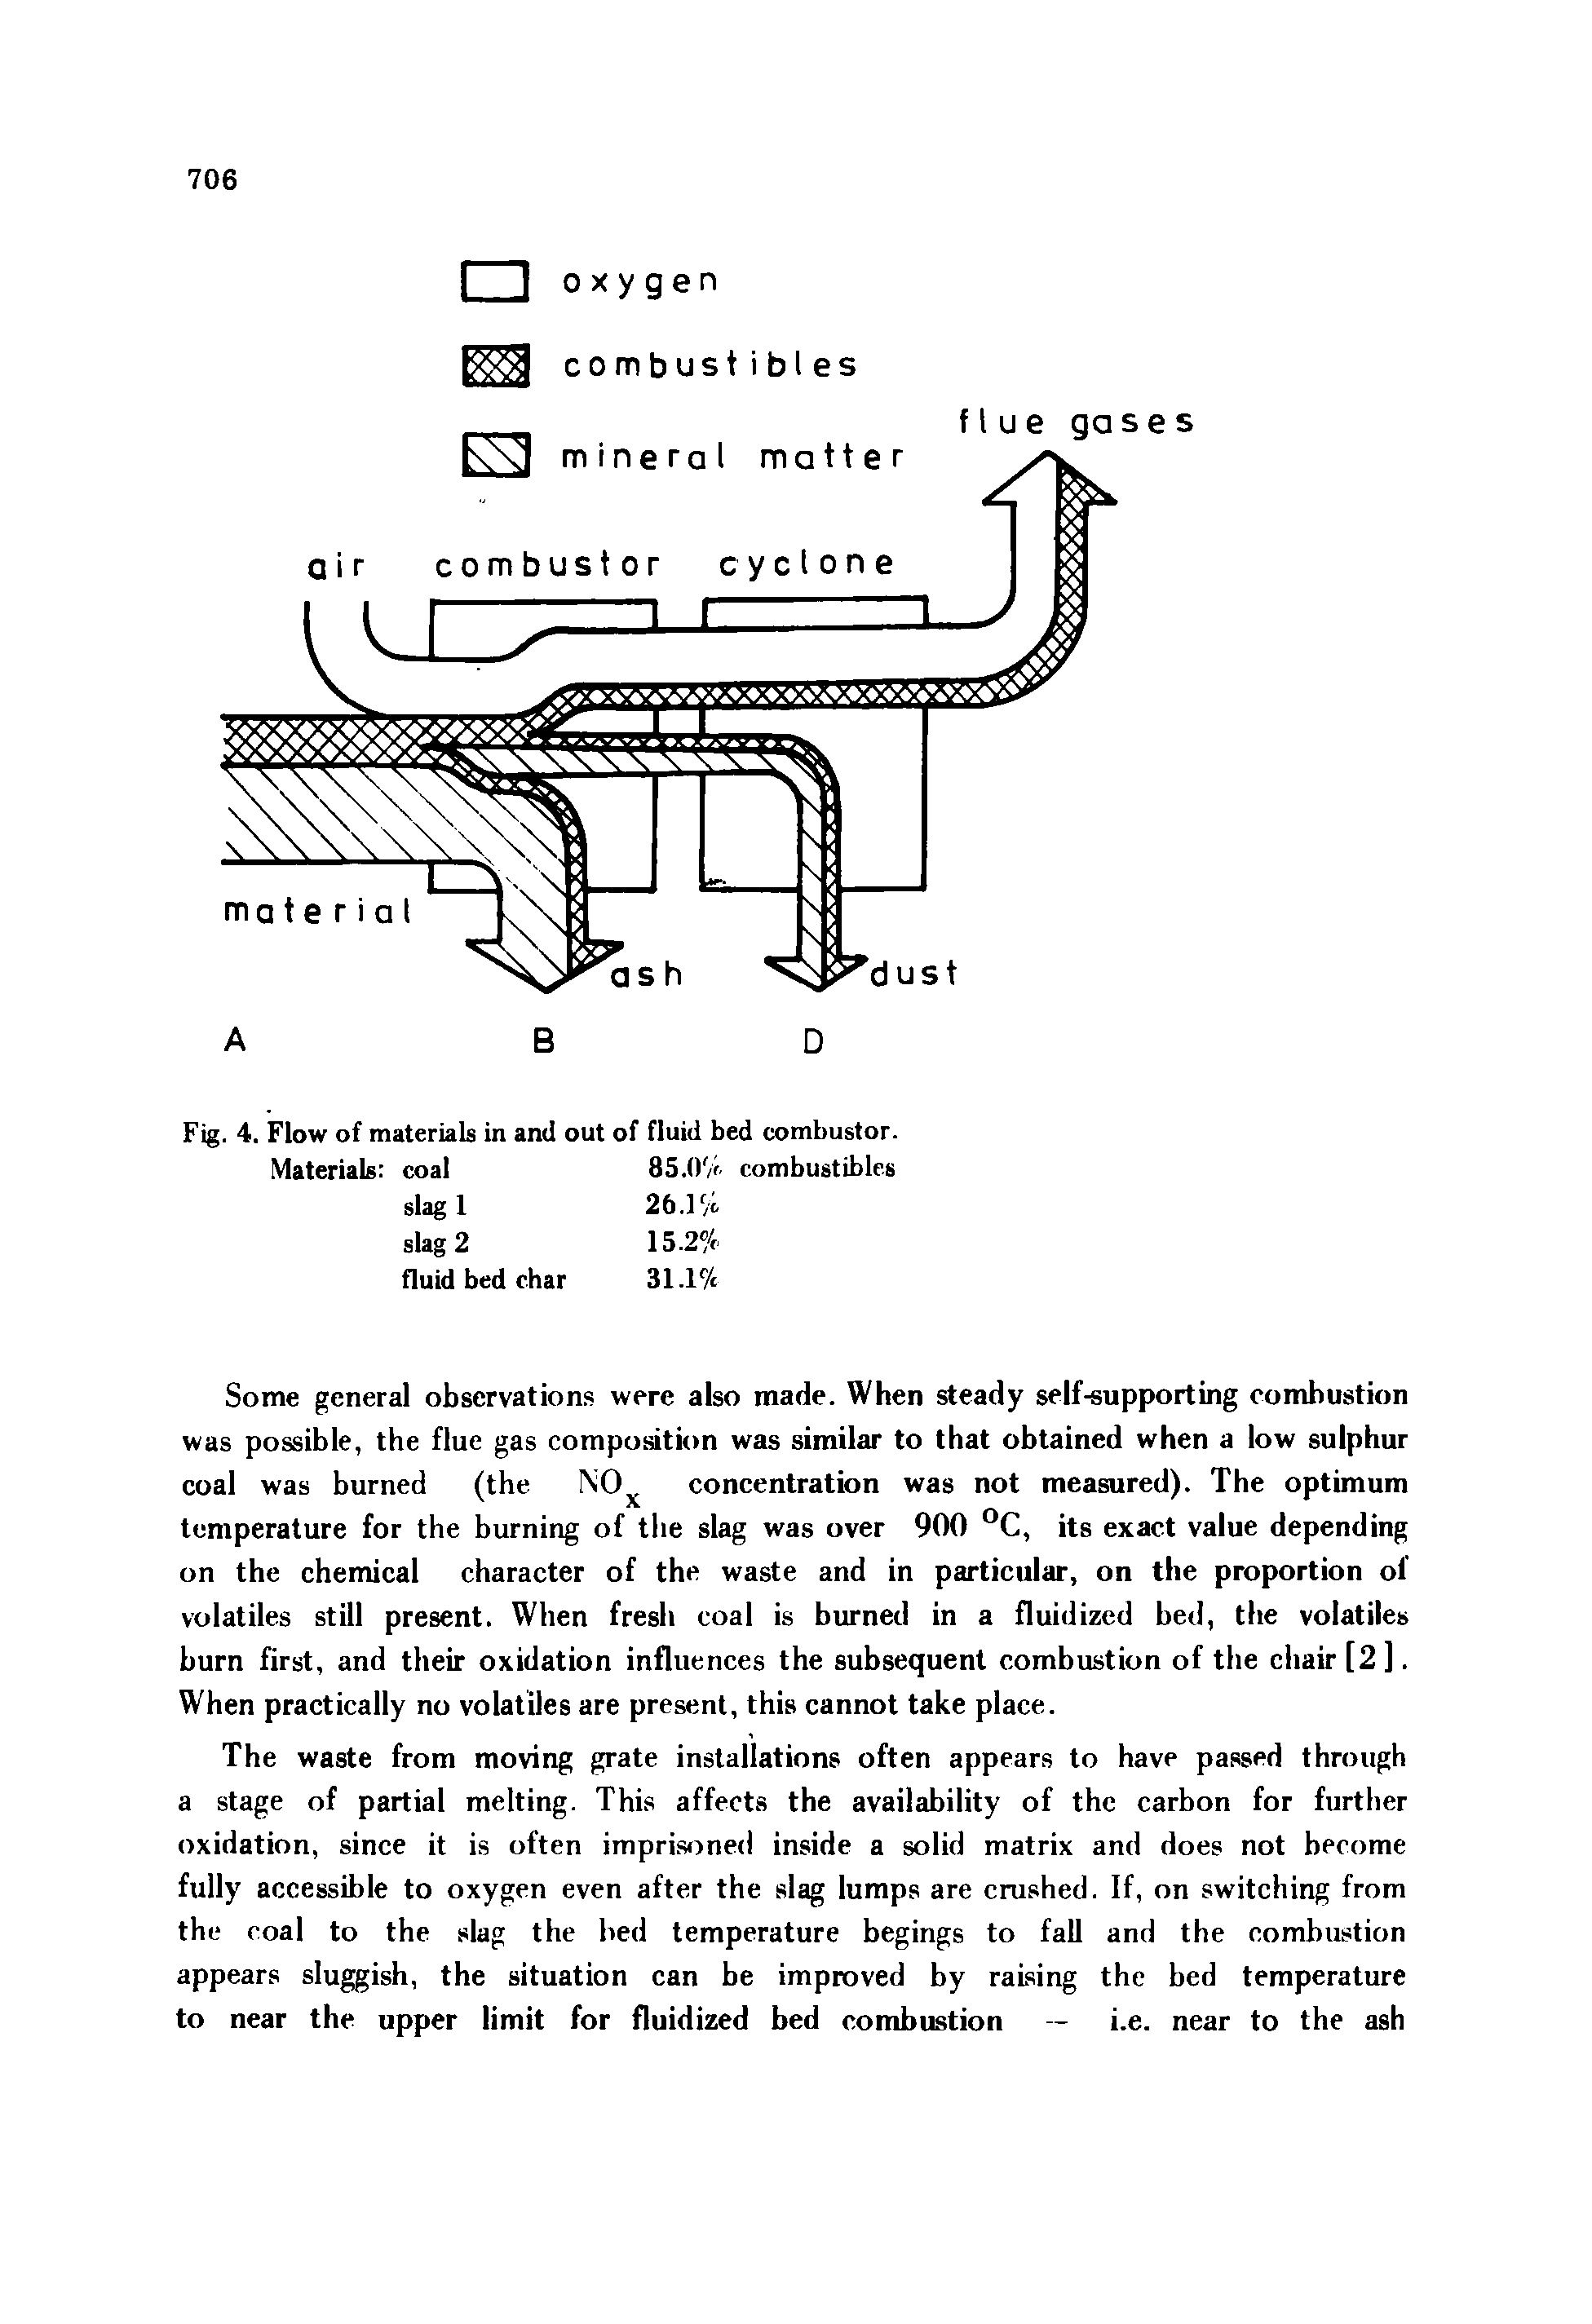 Fig. 4. Flow of materials in and out of fluid bed combustor. Materials coal 85.0 /i combustibles...